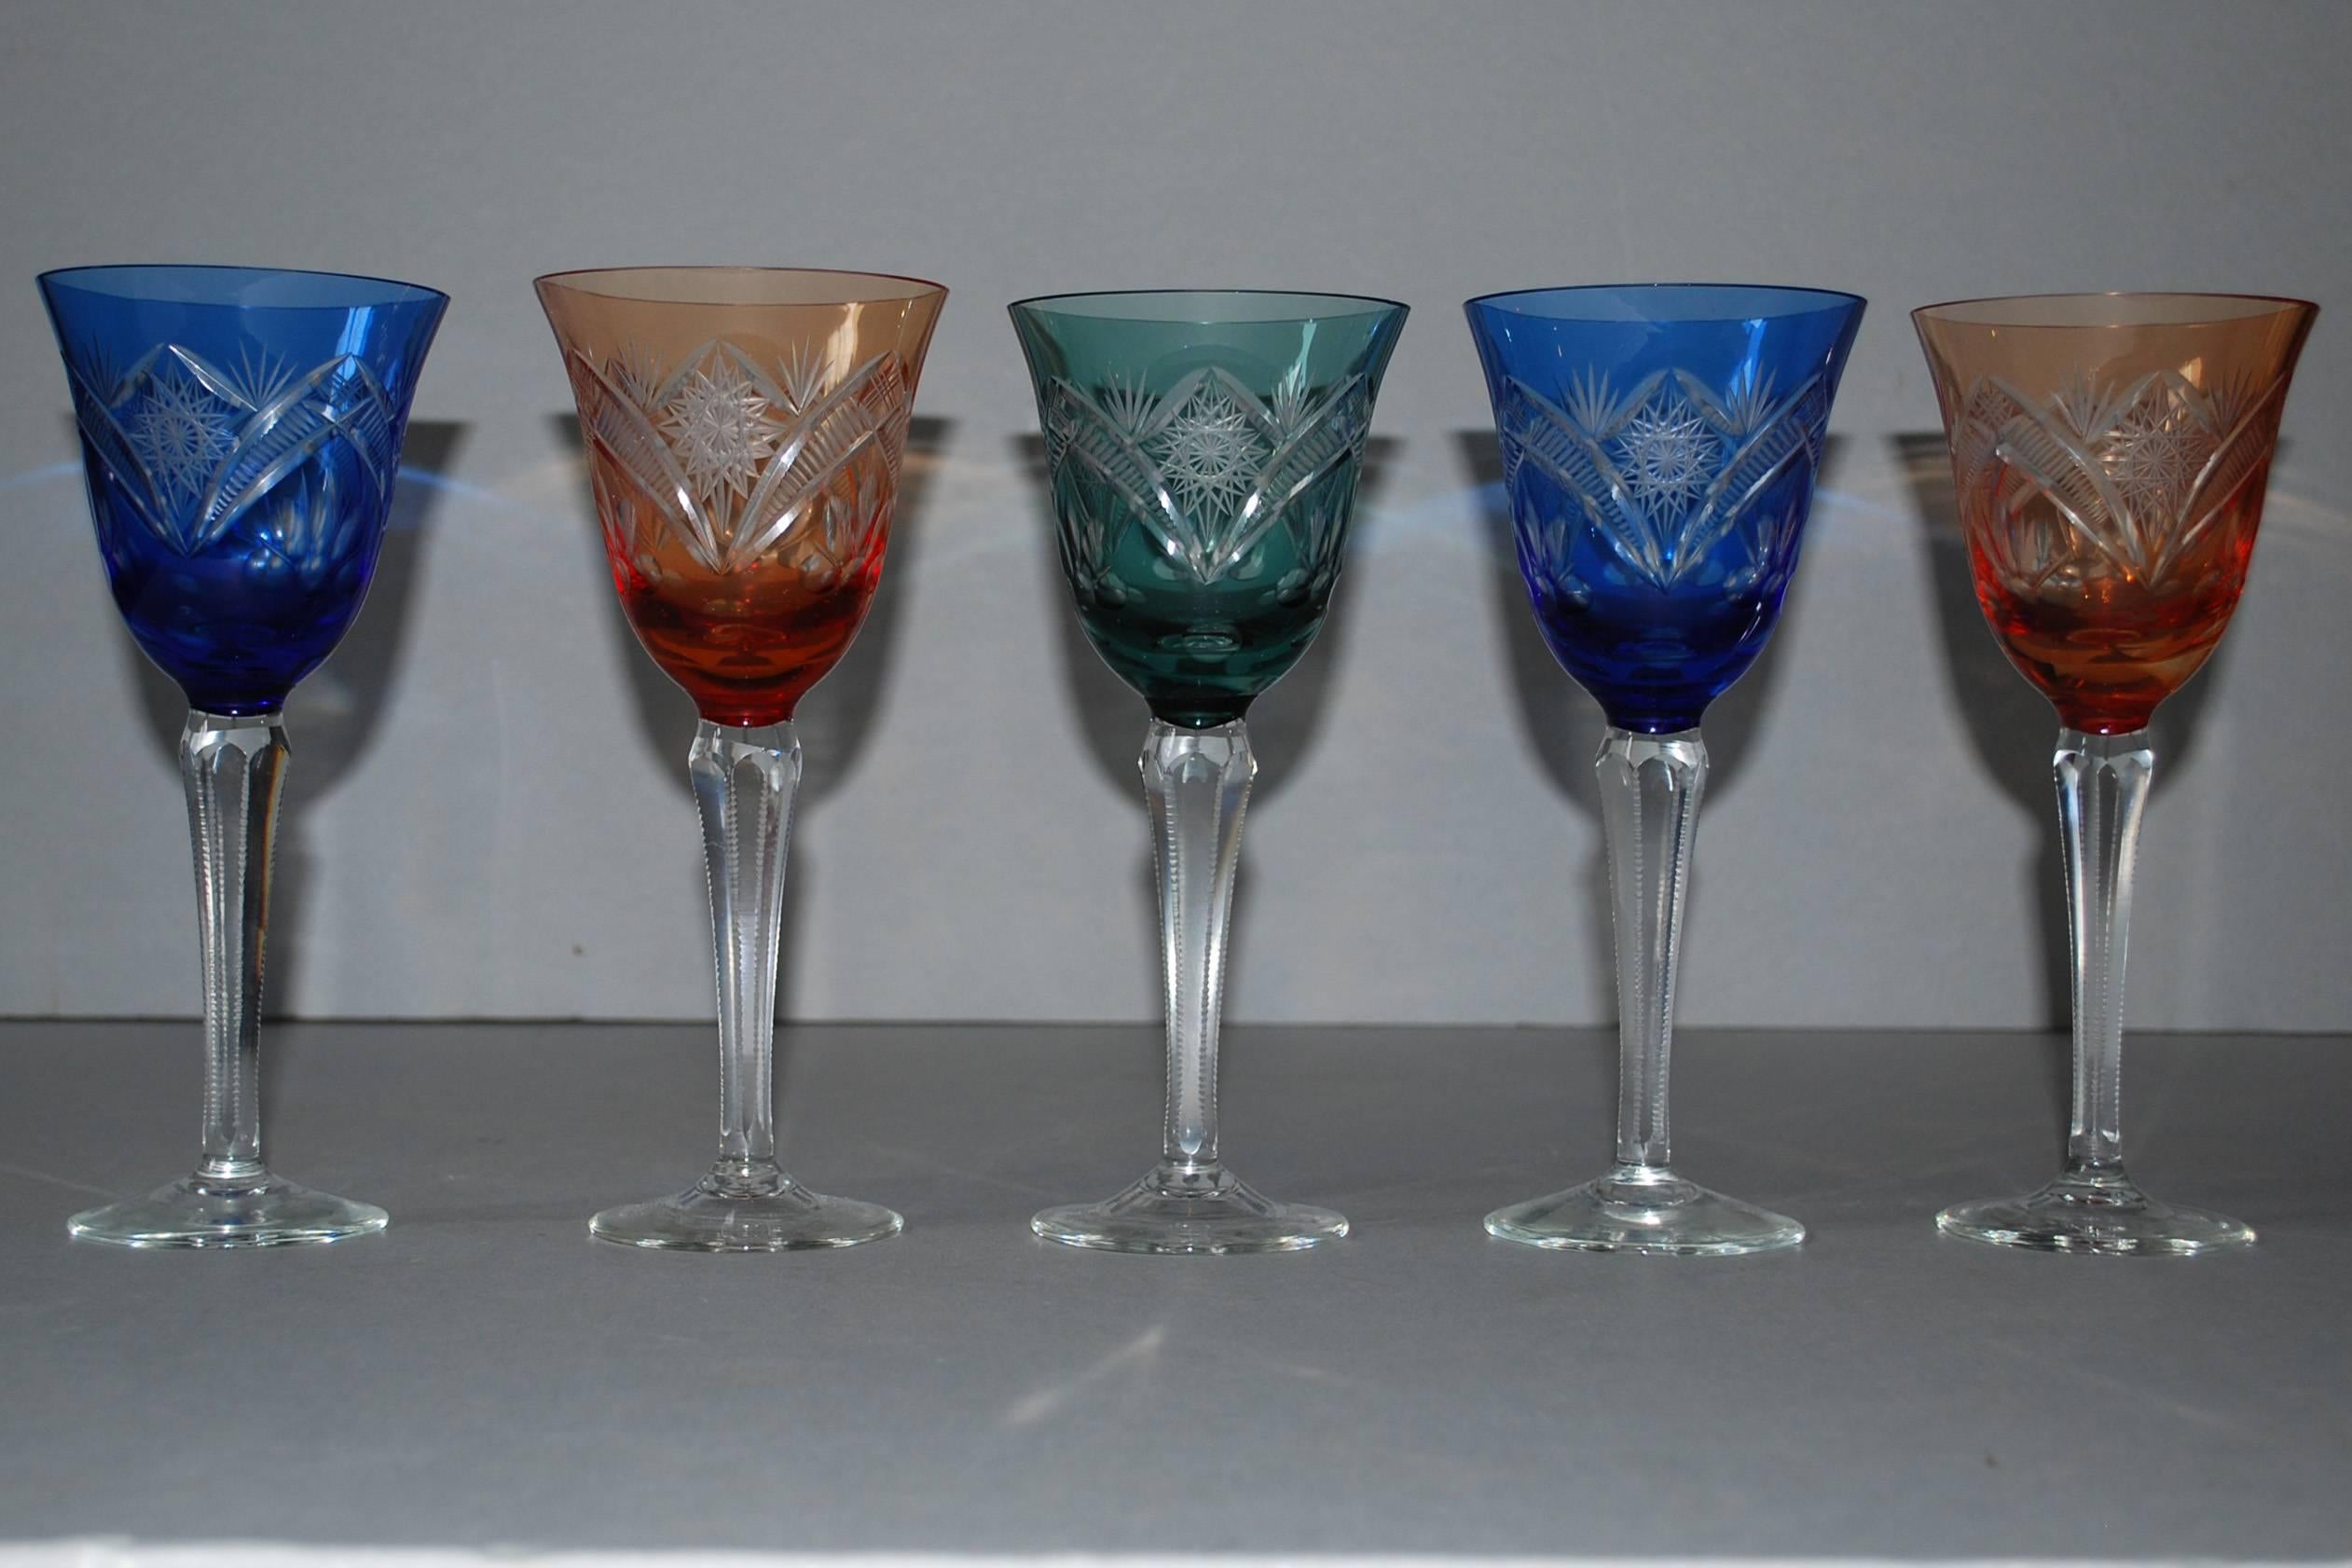 Lot of 5 coloured and polished crystal glasses.
Originates Bohemia, dating app. 1950
(shipping costs on request, depends on destination)